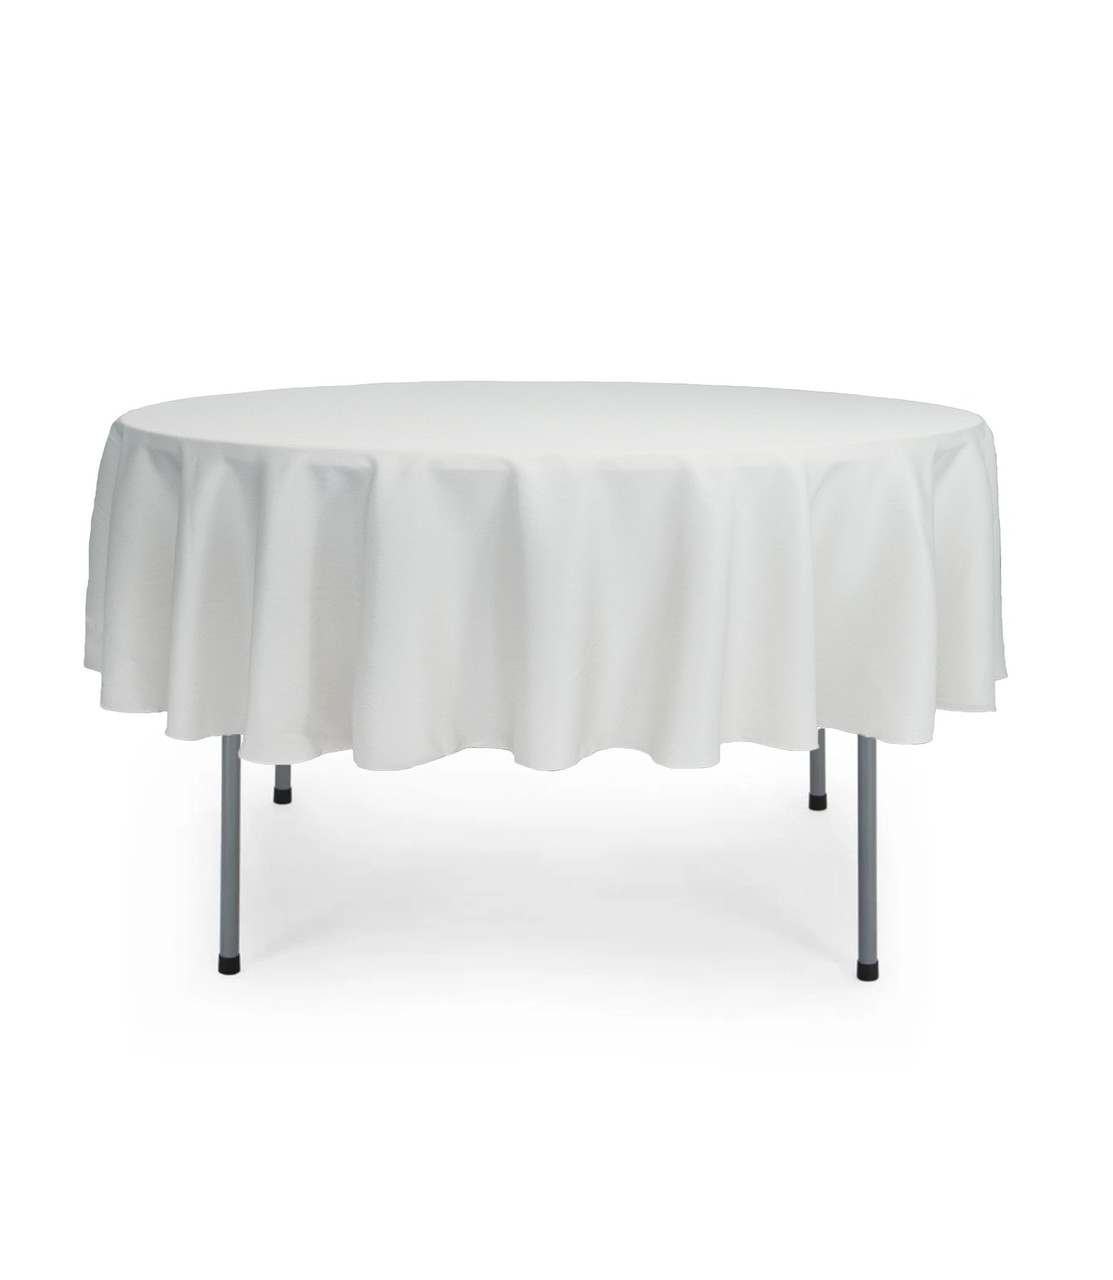 70 Inch Round Polyester Tablecloth White Your Chair Covers Inc